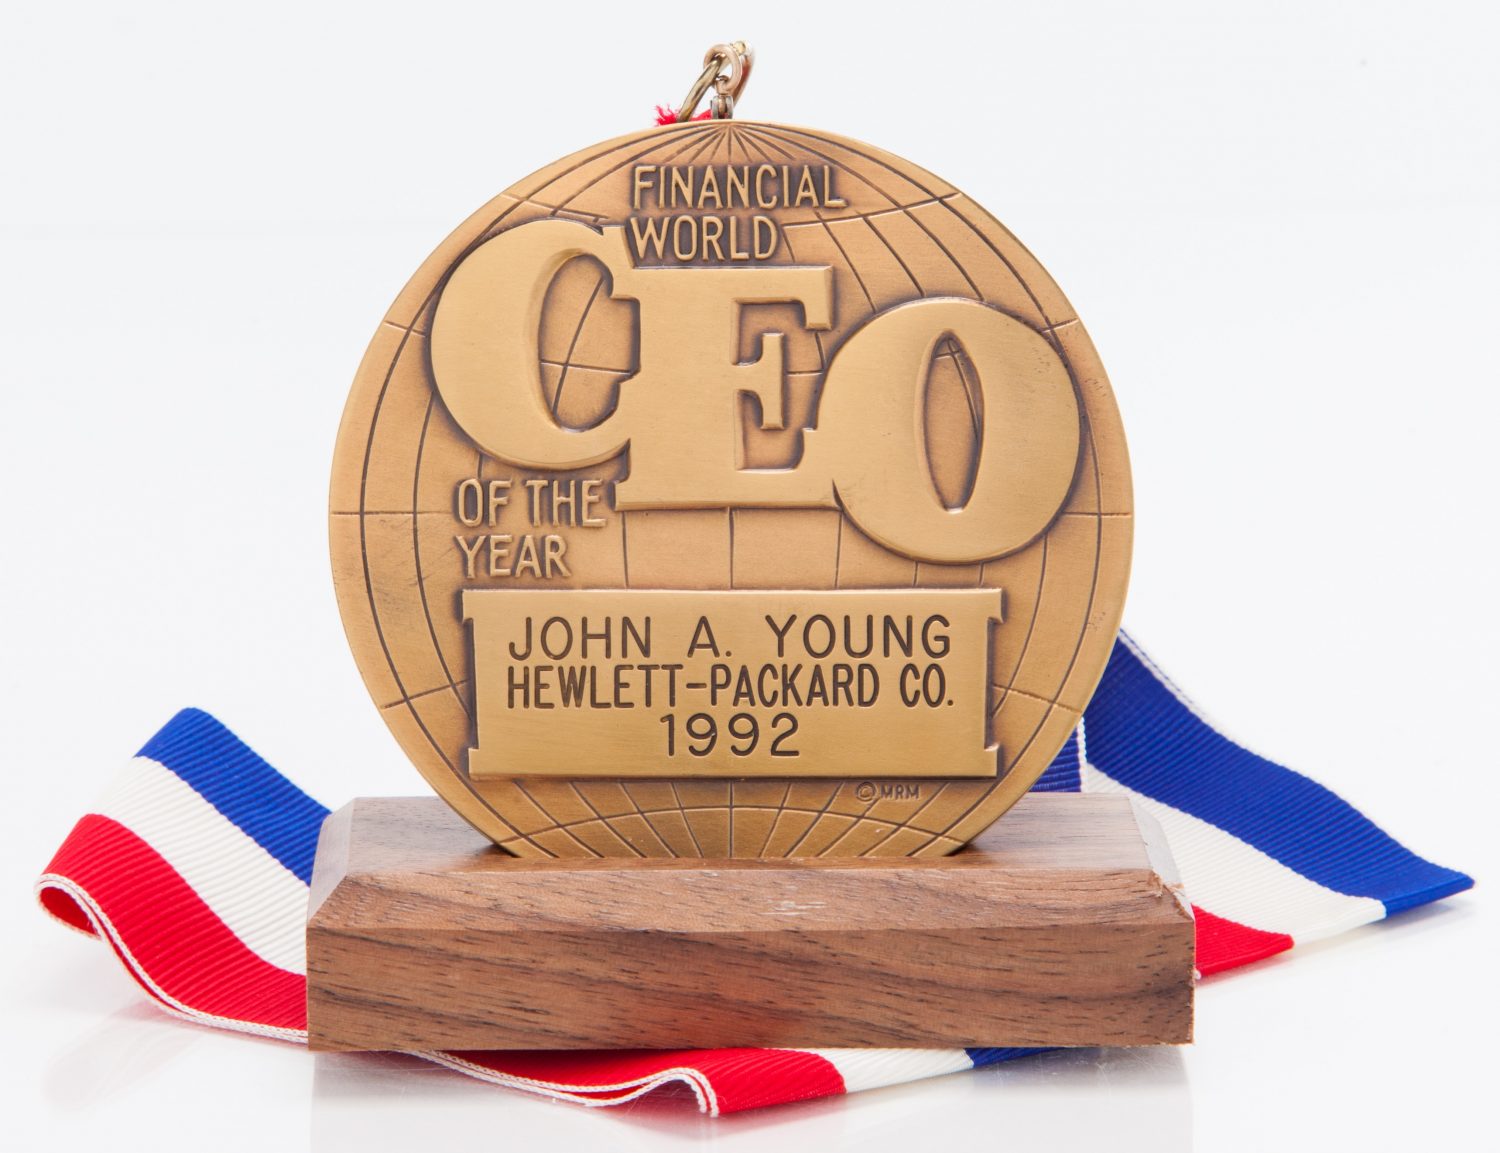 John Young's CEO of the Year award from Financial World magazine, awarded to him in 1992.